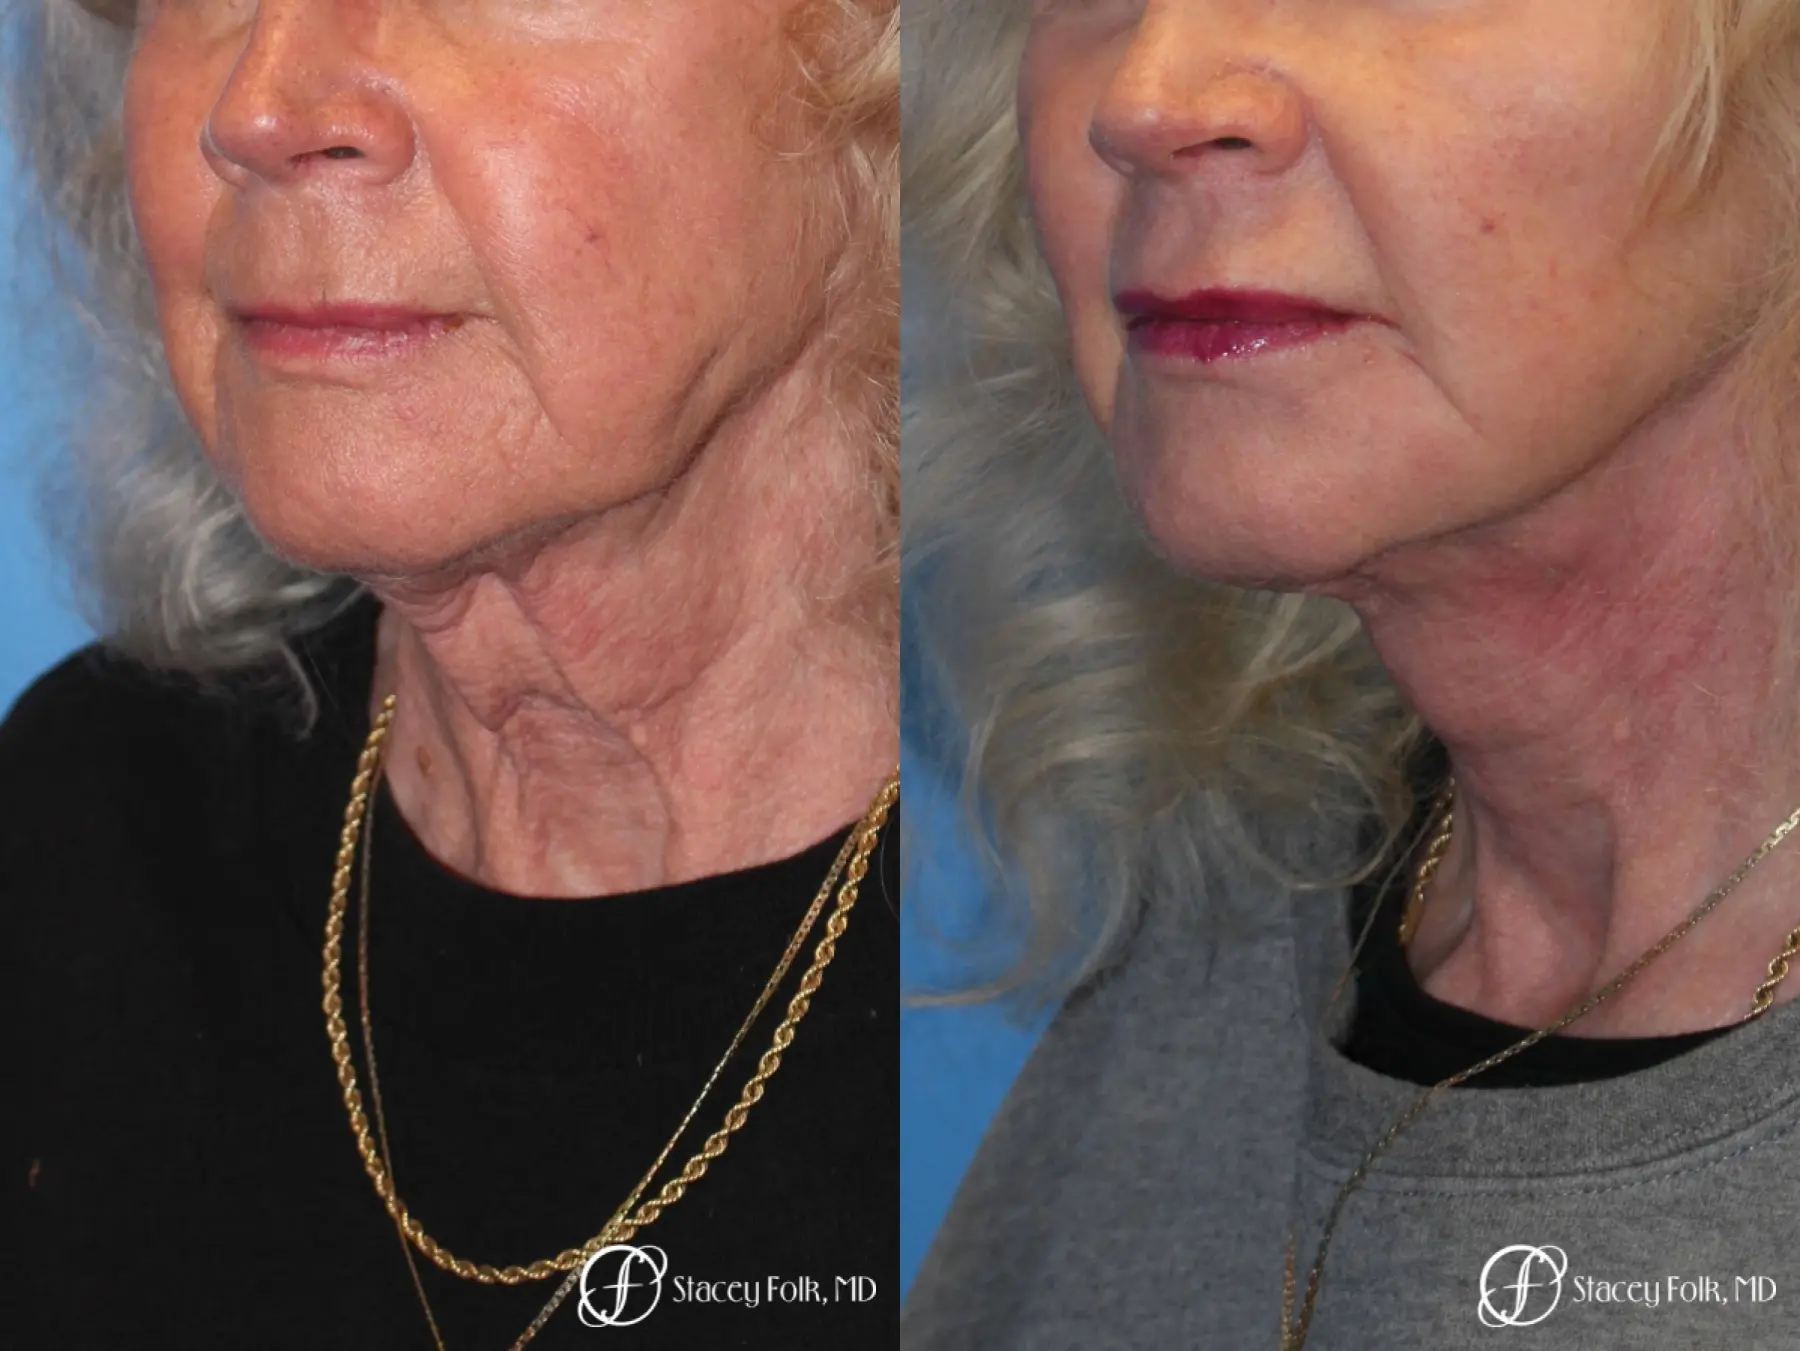 Denver Facial Rejuvenation Face lift, Fat Injections, and Laser Resurfacing 7131 - Before and After 2